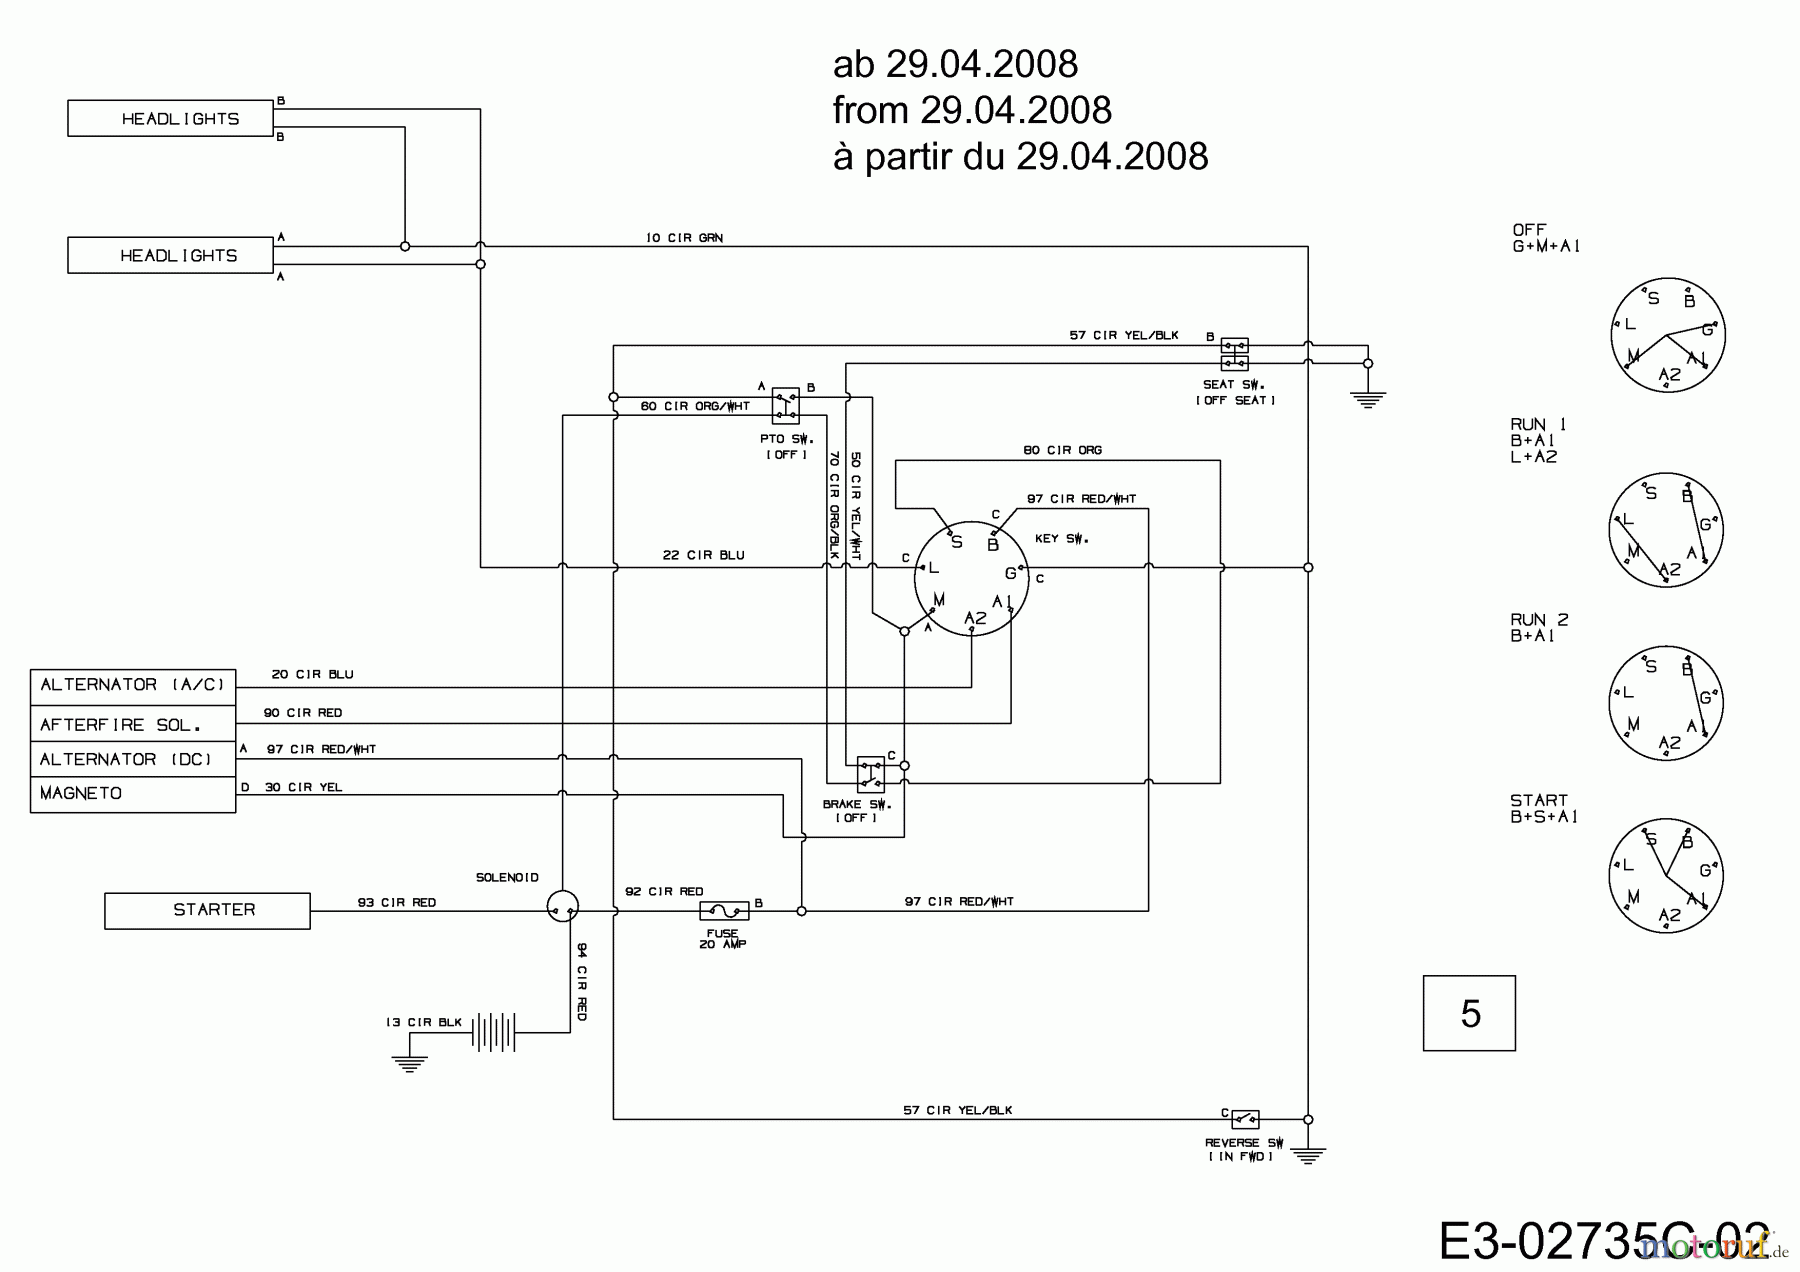  Sunline Lawn tractors RTS 125/96 13AH762F685  (2008) Wiring diagram from 29.04.2008